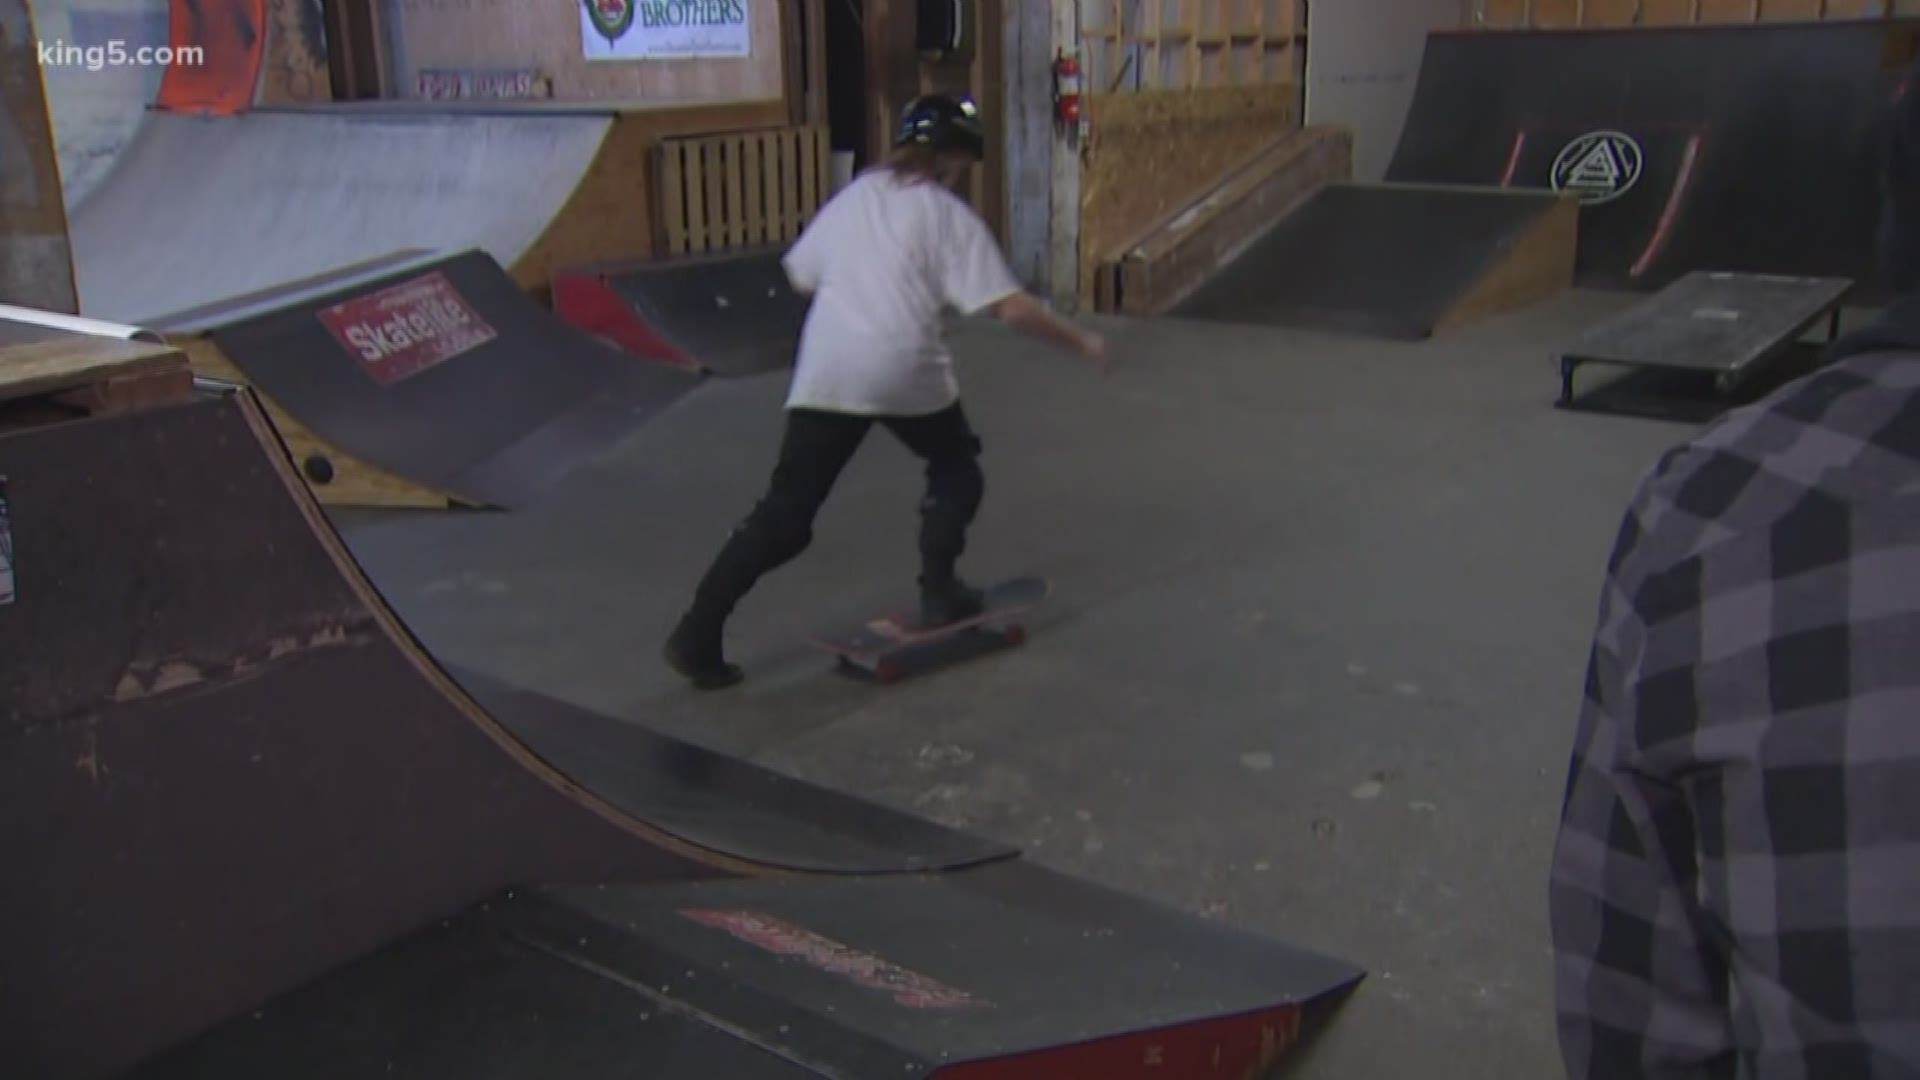 The skateboarding safe haven helps homeless and at-risk teens.  Securing funding has been difficult lately.  So the non-profit is asking the community for help.